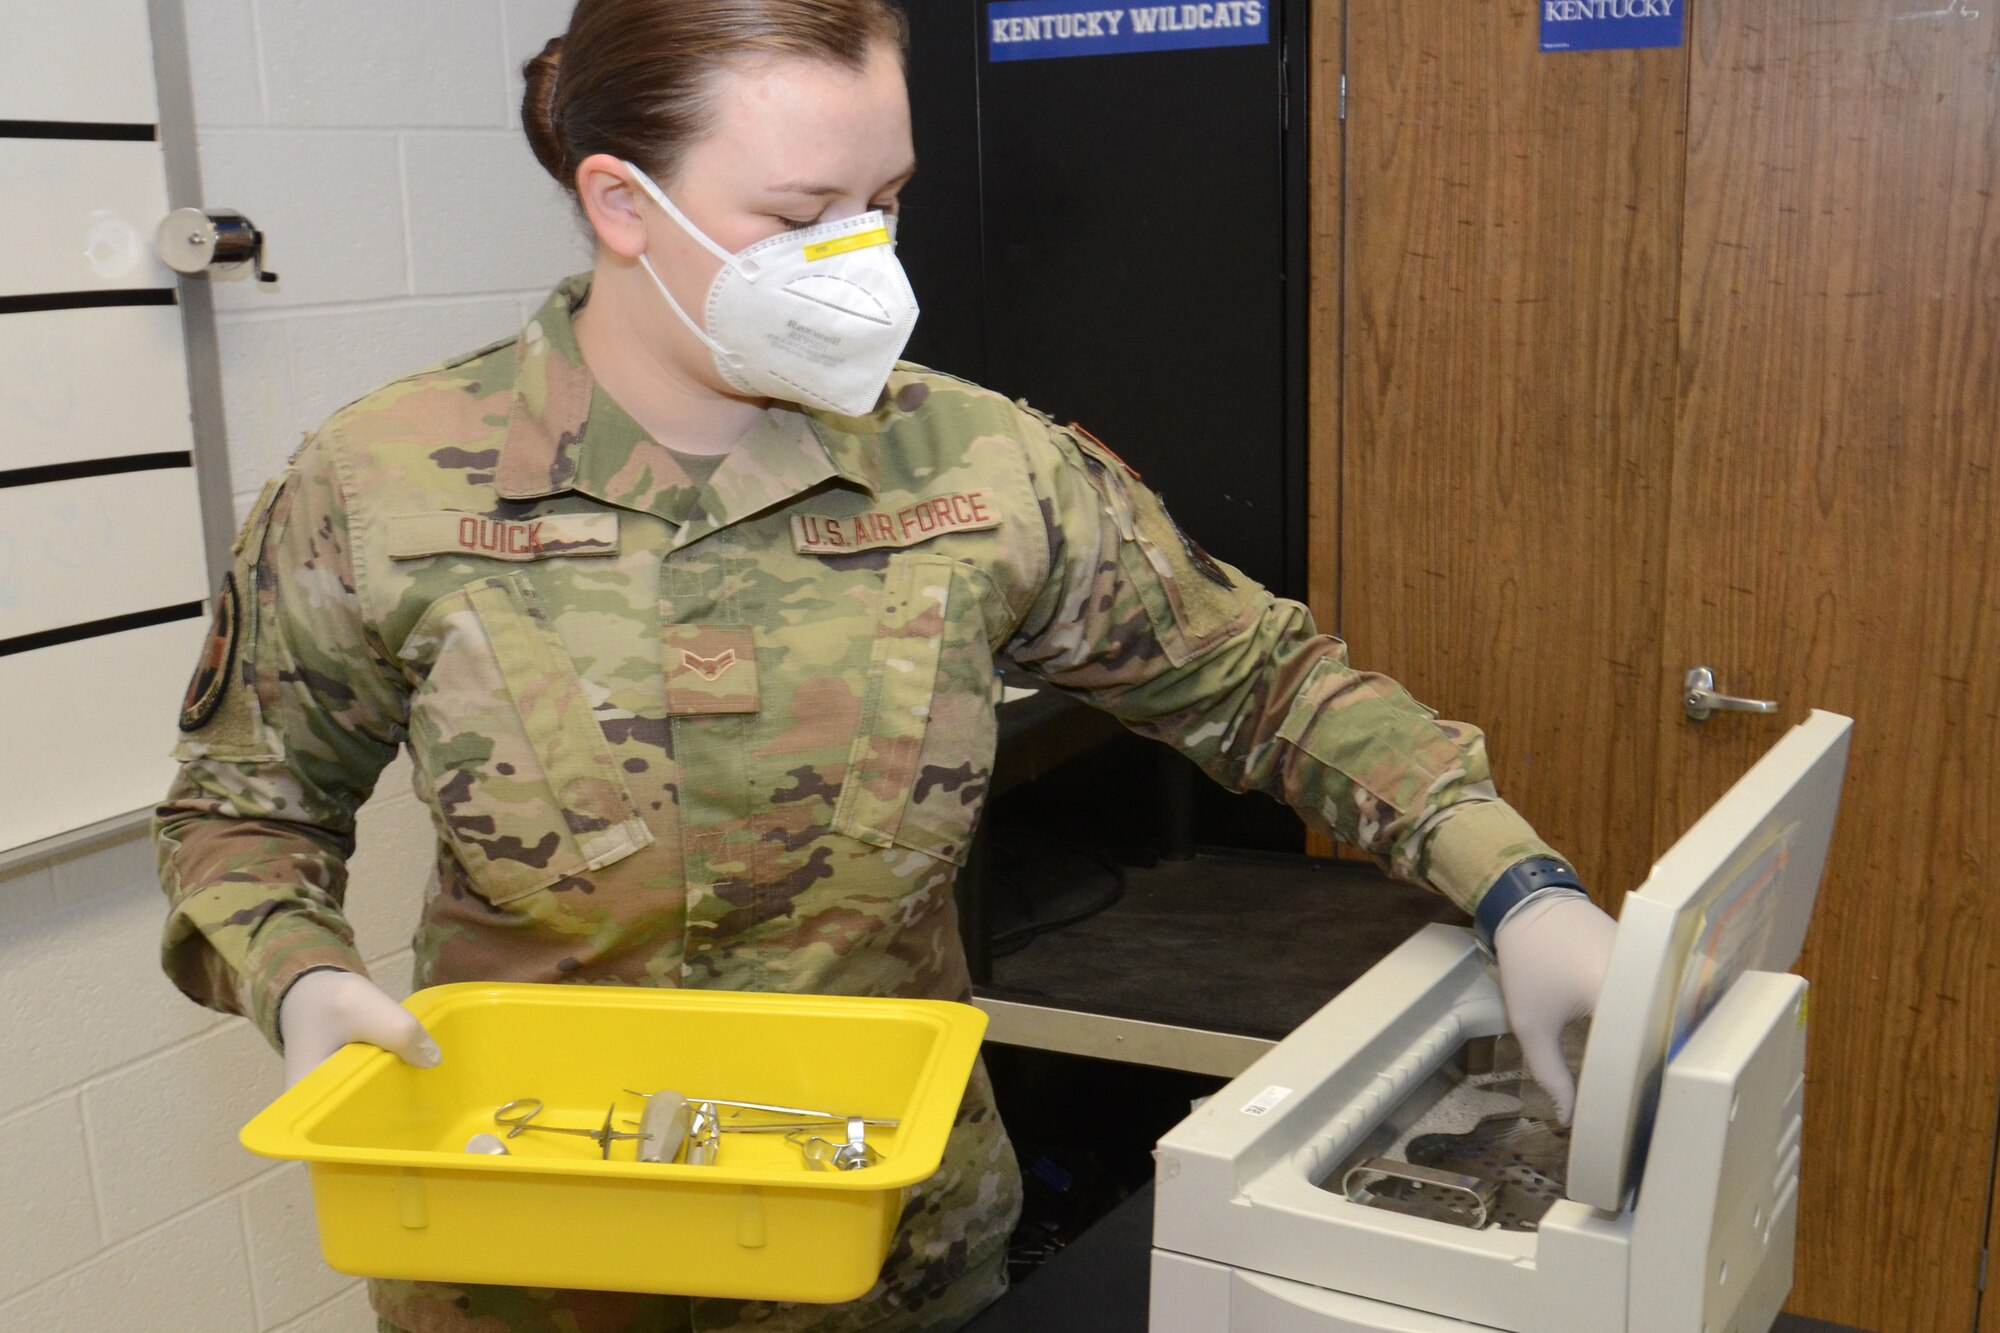 U.S. Air Force Airman 1st Class Madison Quick, assigned to the 169th Fighter Wing, McEntire Joint National Guard Base, South Carolina, supports Operation Healthy Delta, a Department of Defense sponsored Innovative Readiness Training program designed to provide military training opportunities by providing key services to local citizens. Quick is sterilizing dental equipment in the lab at Massac County High School, Metropolis, Illinois June 16, 2021. (U.S. Air National Guard photo by Lt. Col. Jim St.Clair, 169th Fighter Wing Public Affairs)